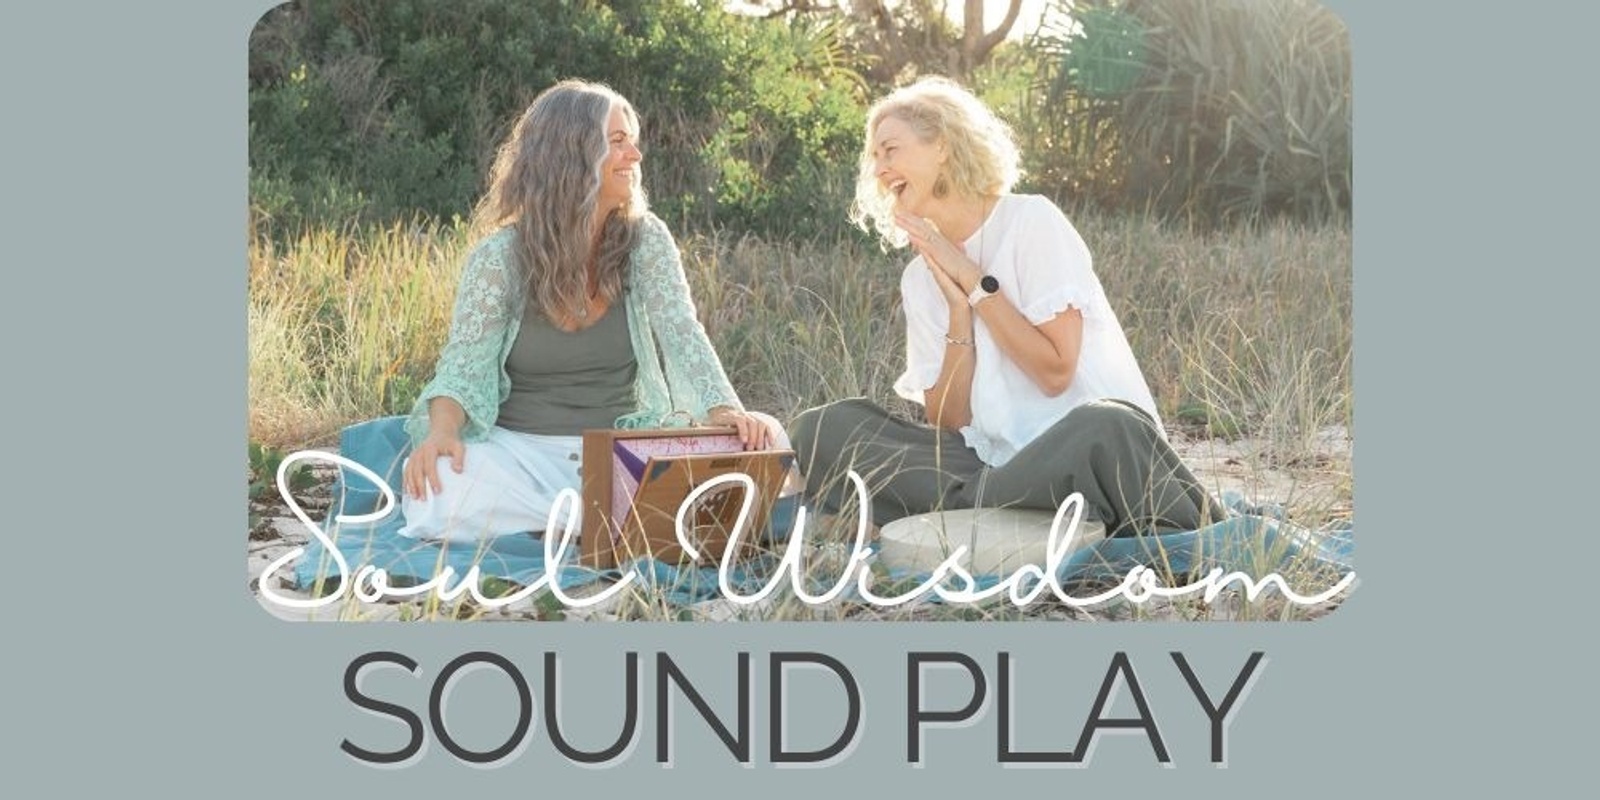 Banner image for Soul Wisdom Sound Play